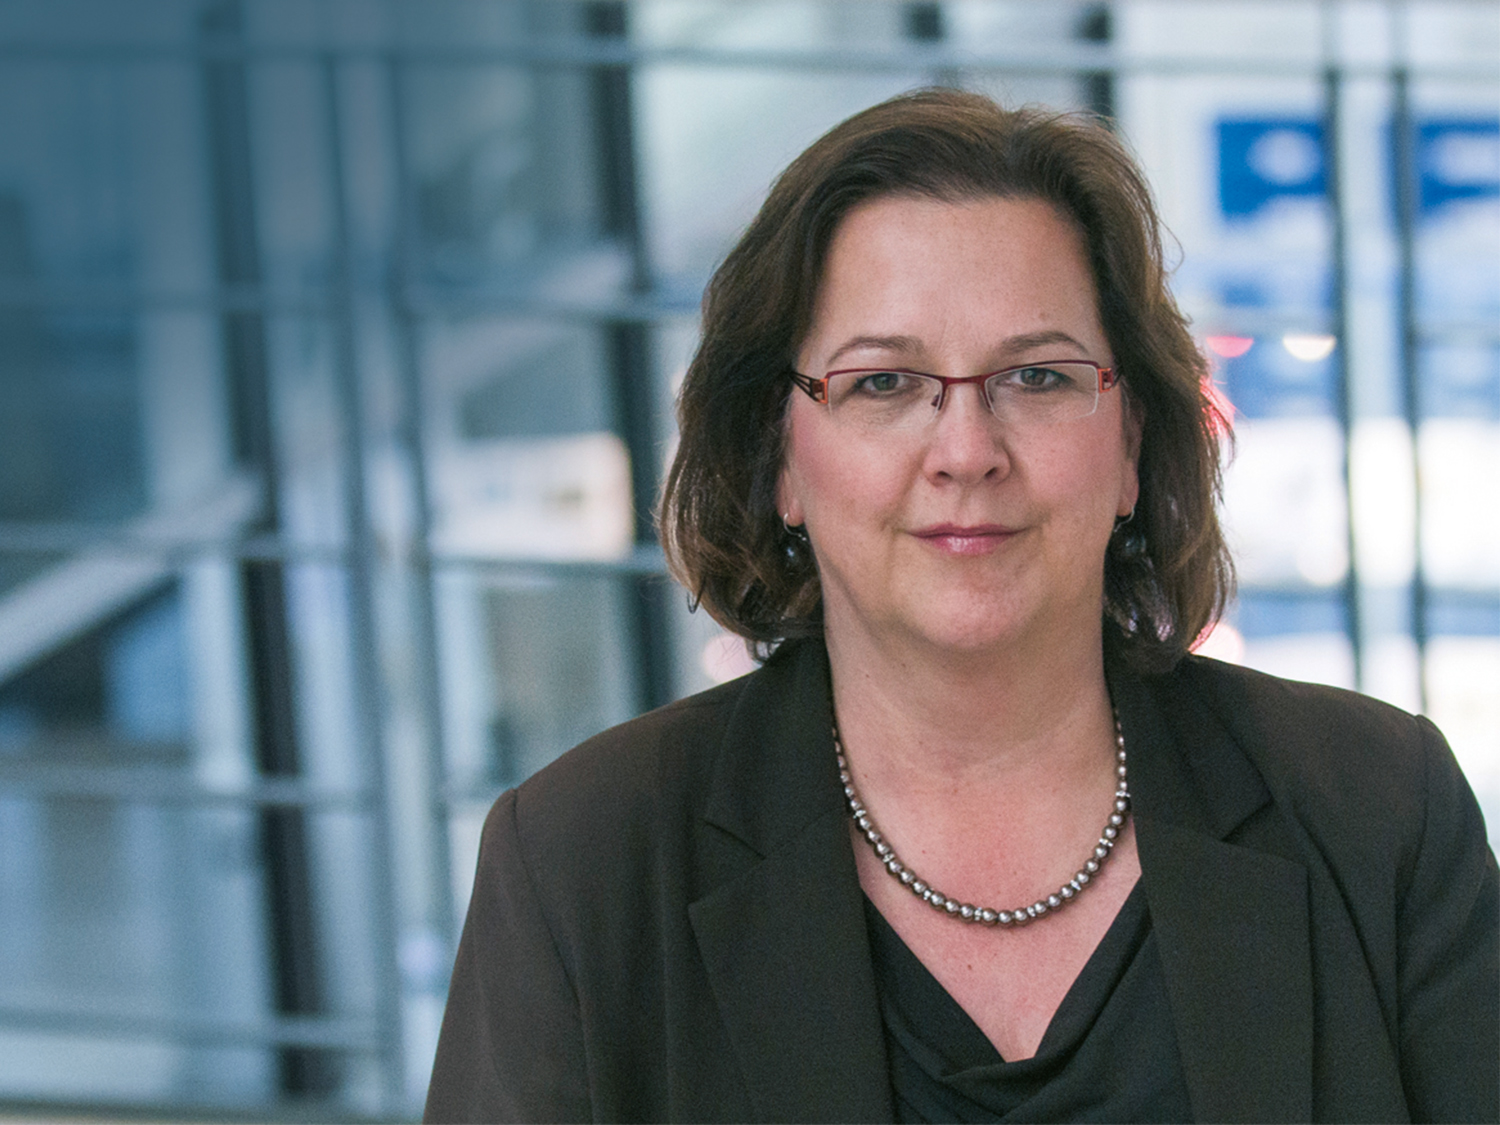 Prof. Martina Zimmermann becomes the first female president of the German Materials Society (DGM). She starts work on January 1, 2021.